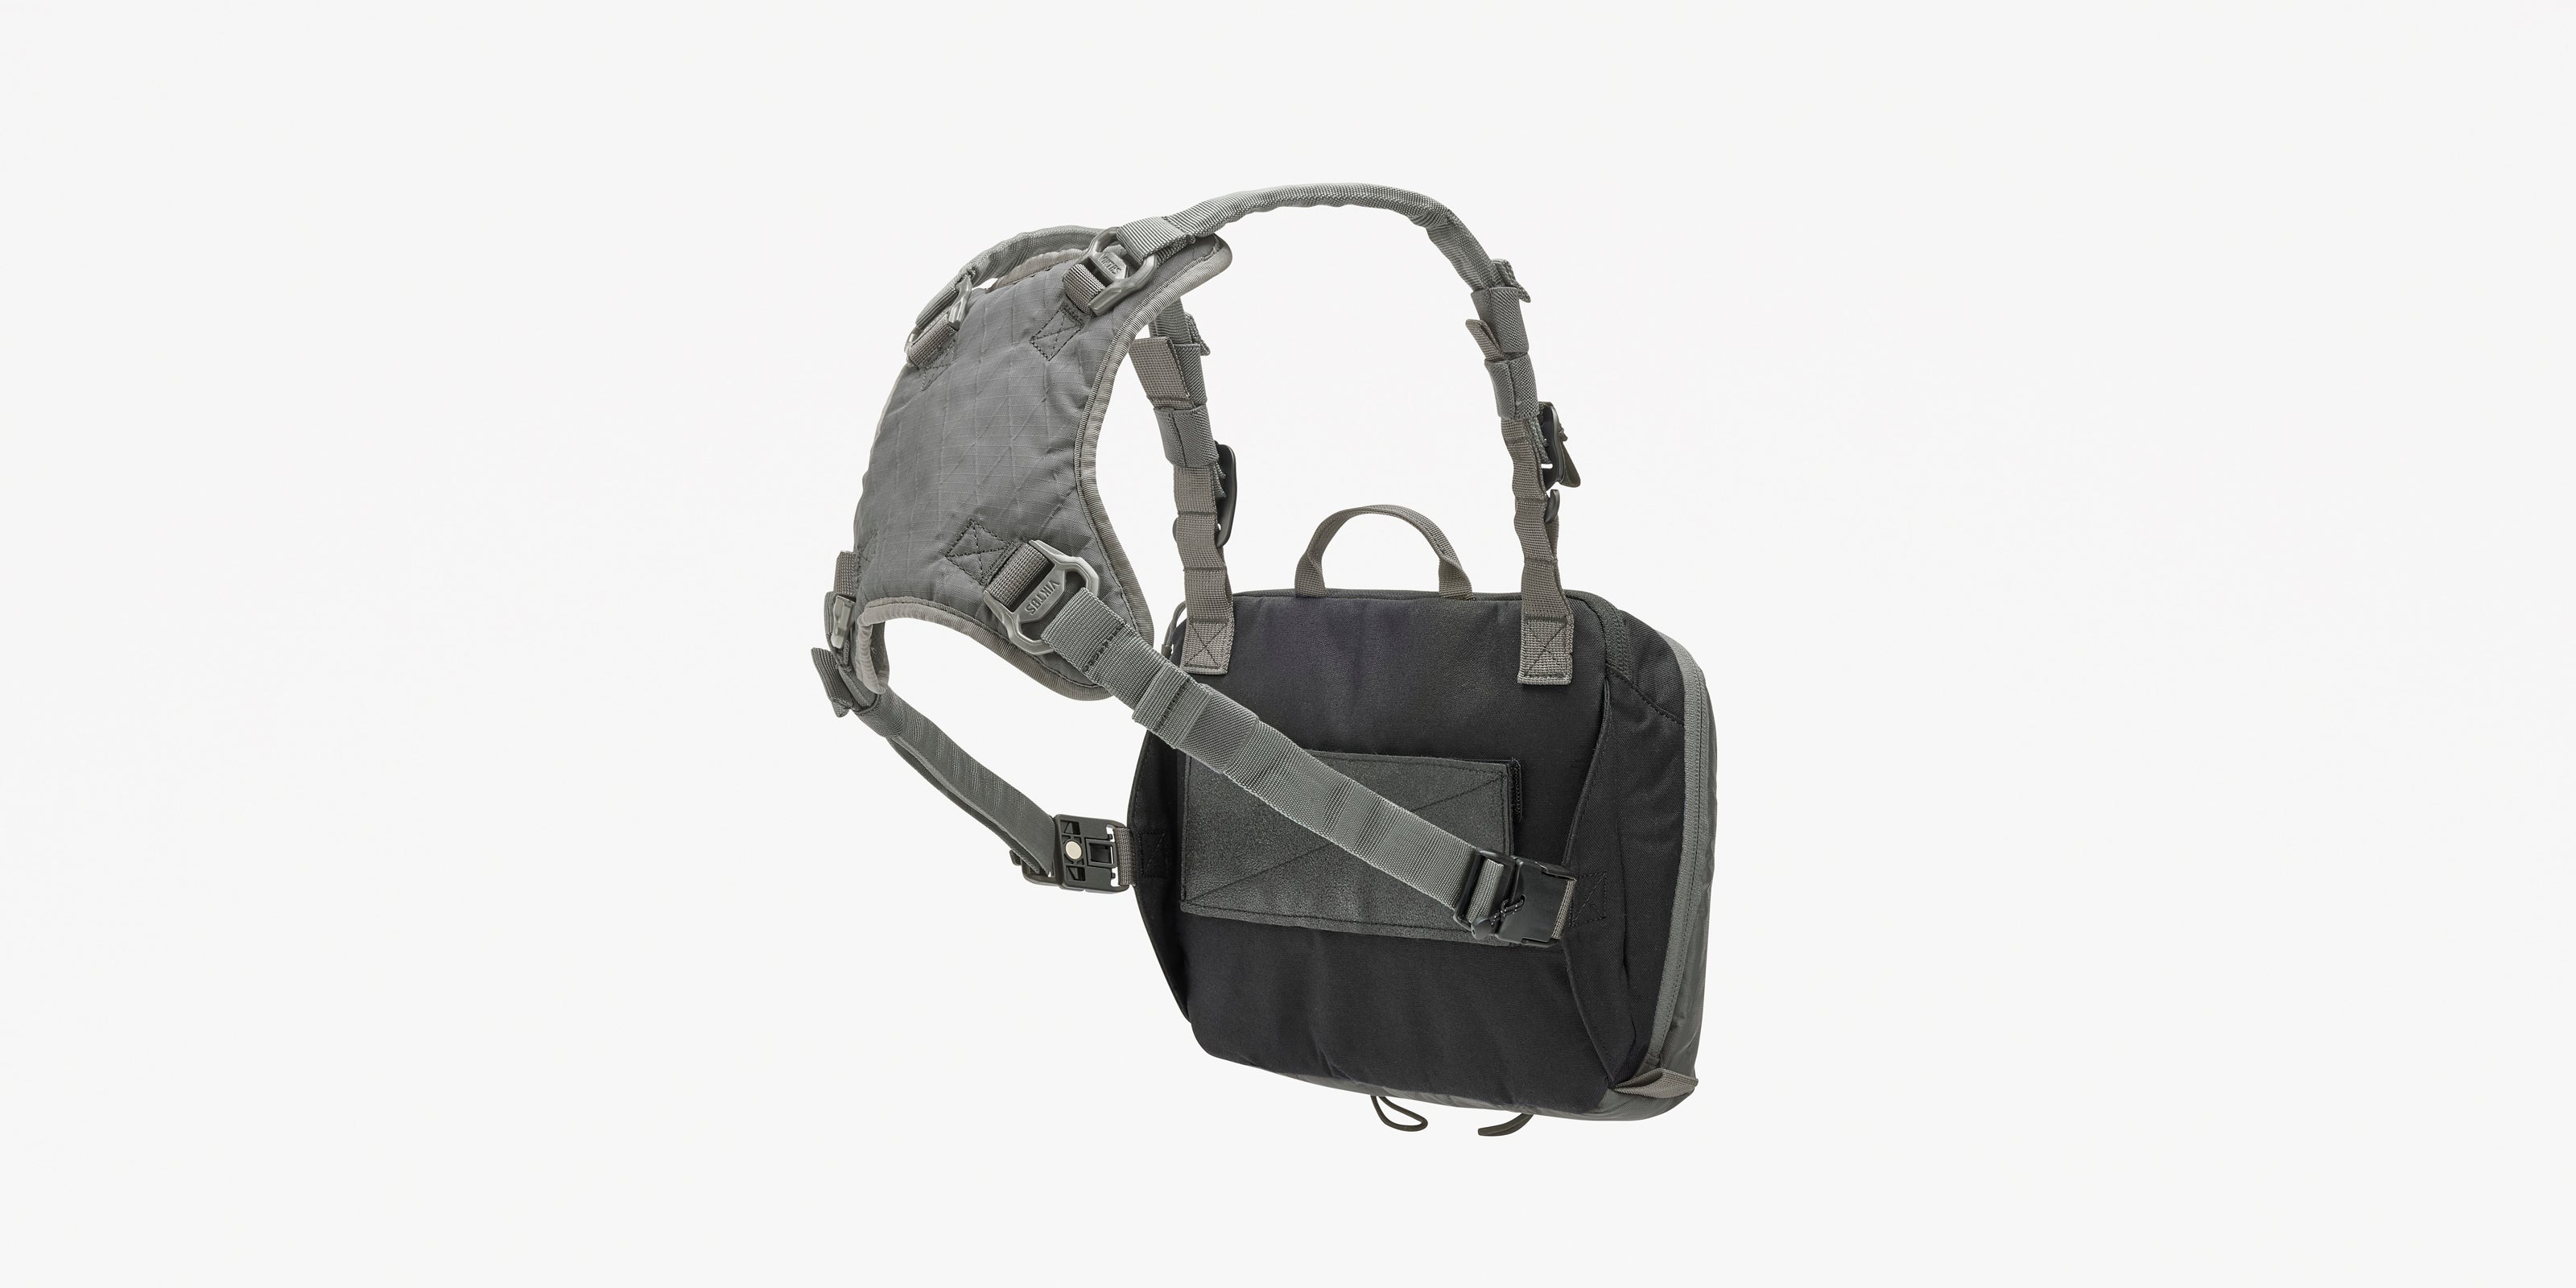 Is That The New Guys Minimalist Pocket Front Chest Rig Bag ??